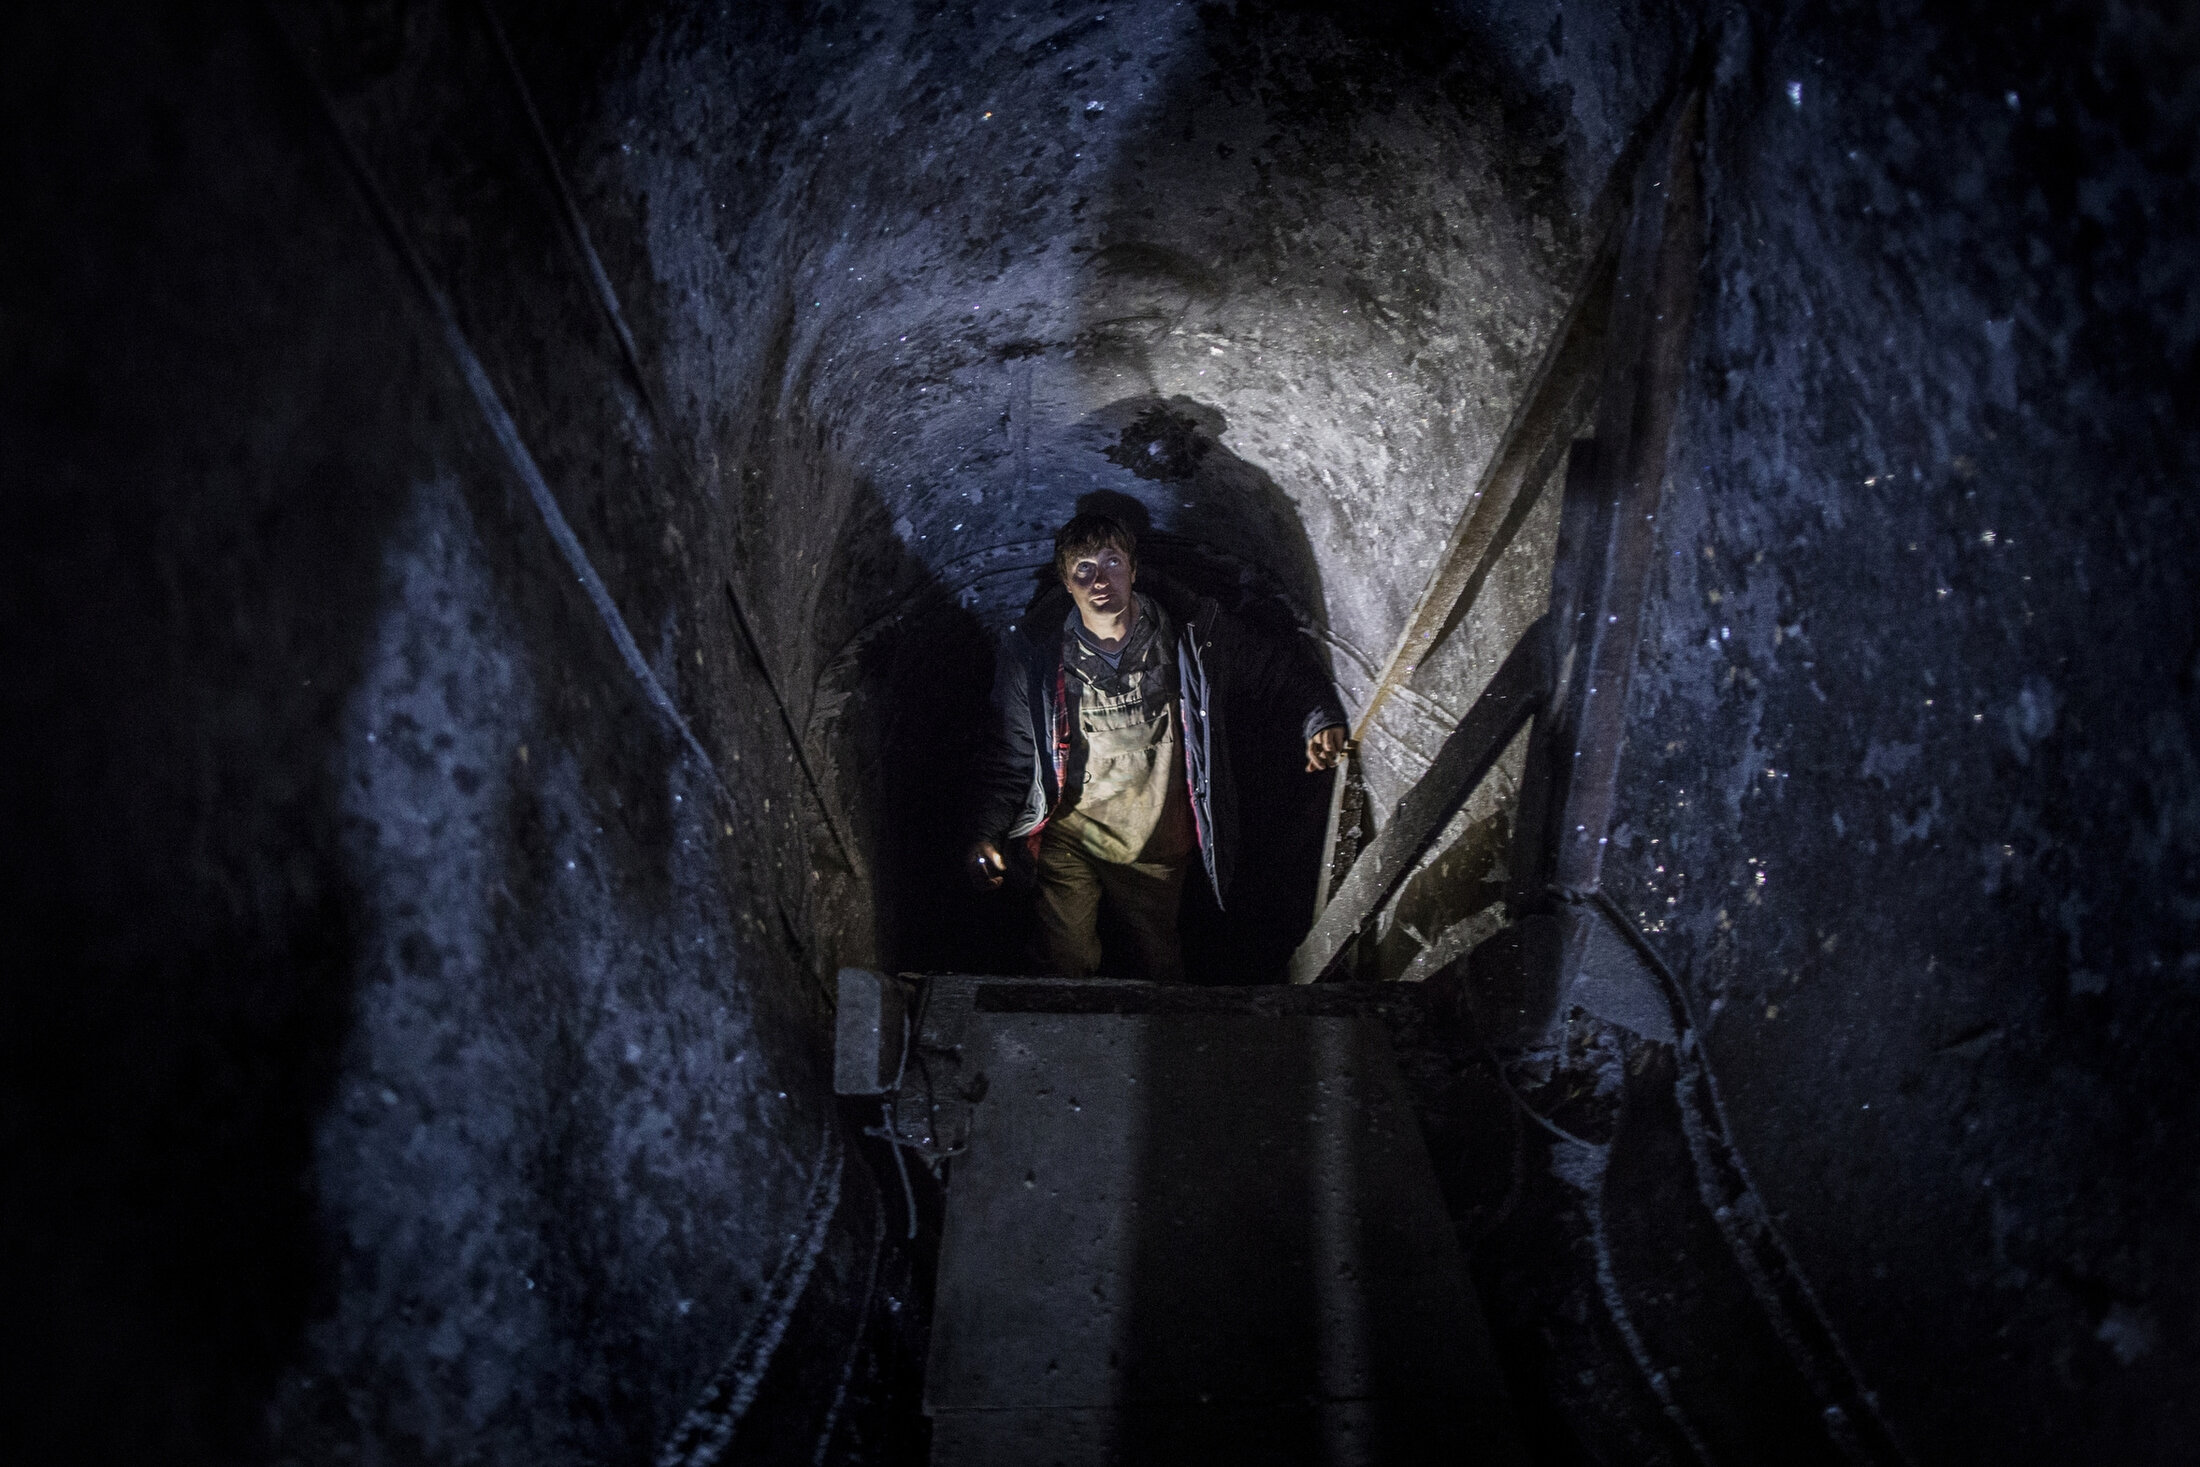  Nikita Zimov in the Pleistocene Park ice cellar. Ice cellars, or freezers, have been dug into the permafrost for thousands of years. The ice cellars in and around Chersky, Siberia are now flooding on an annual basis due to permafrost thaw. Some are 